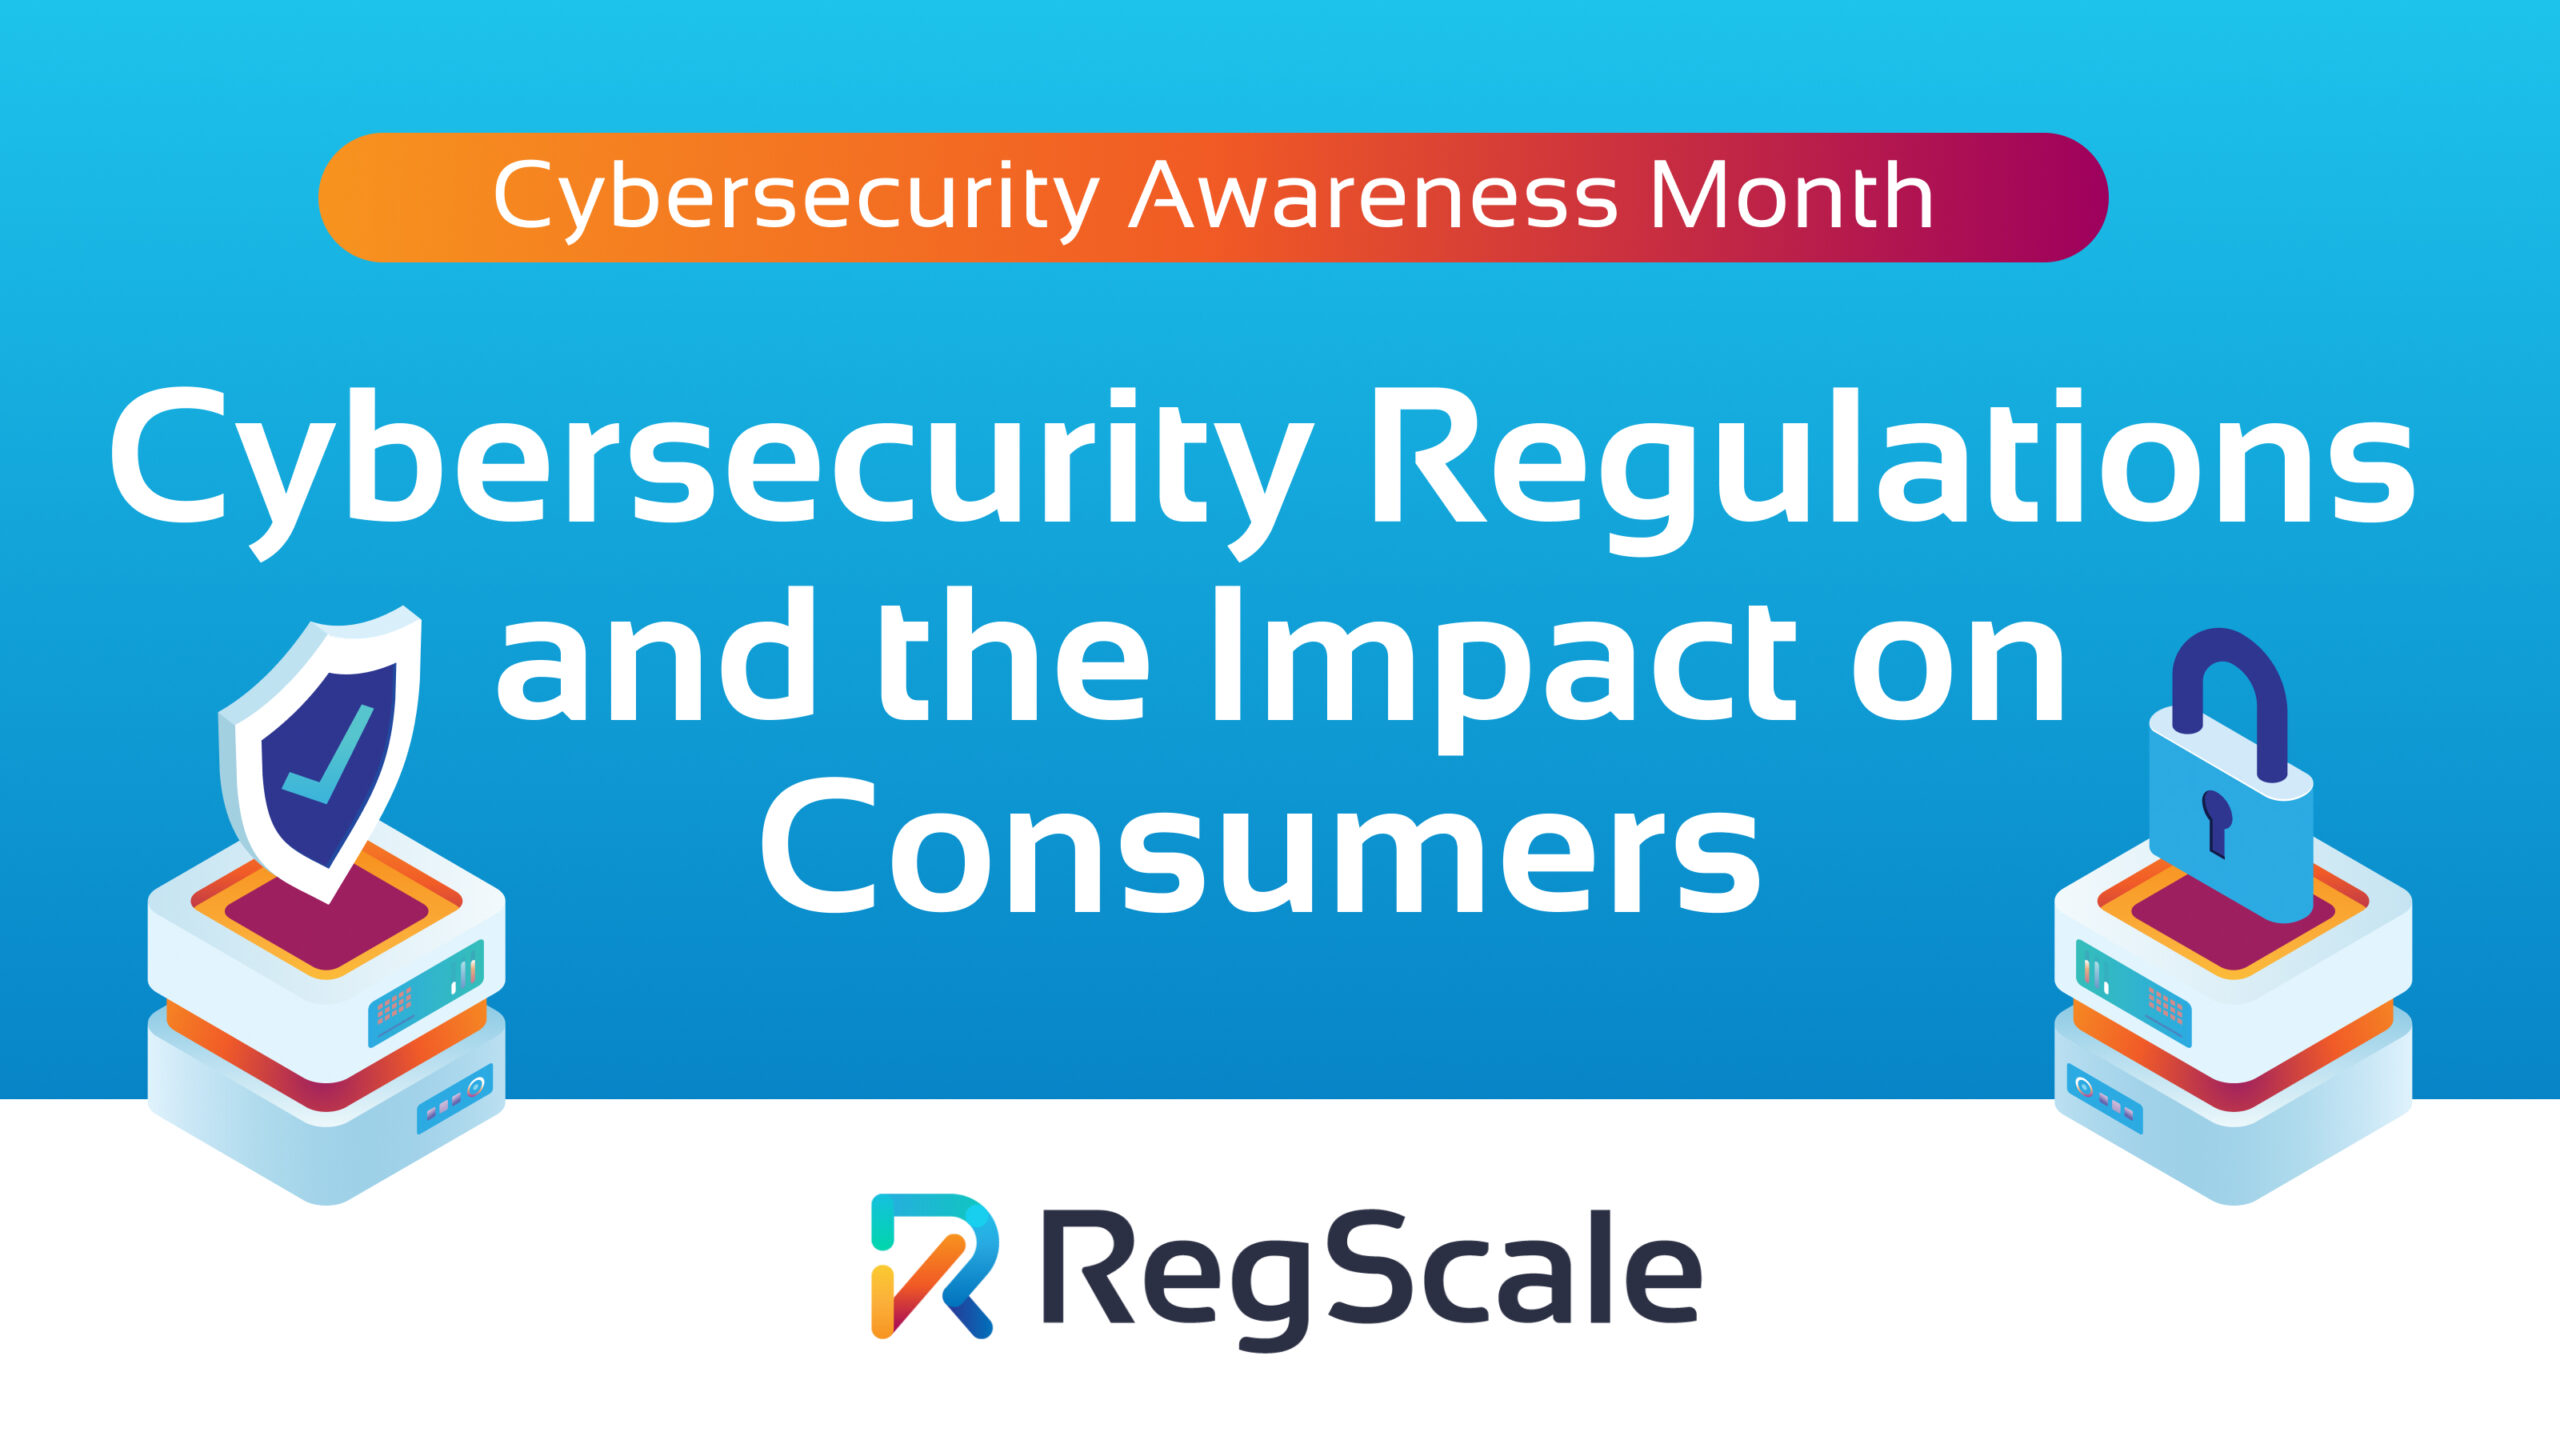 Cybersecurity Regulations and the Impact on Consumers